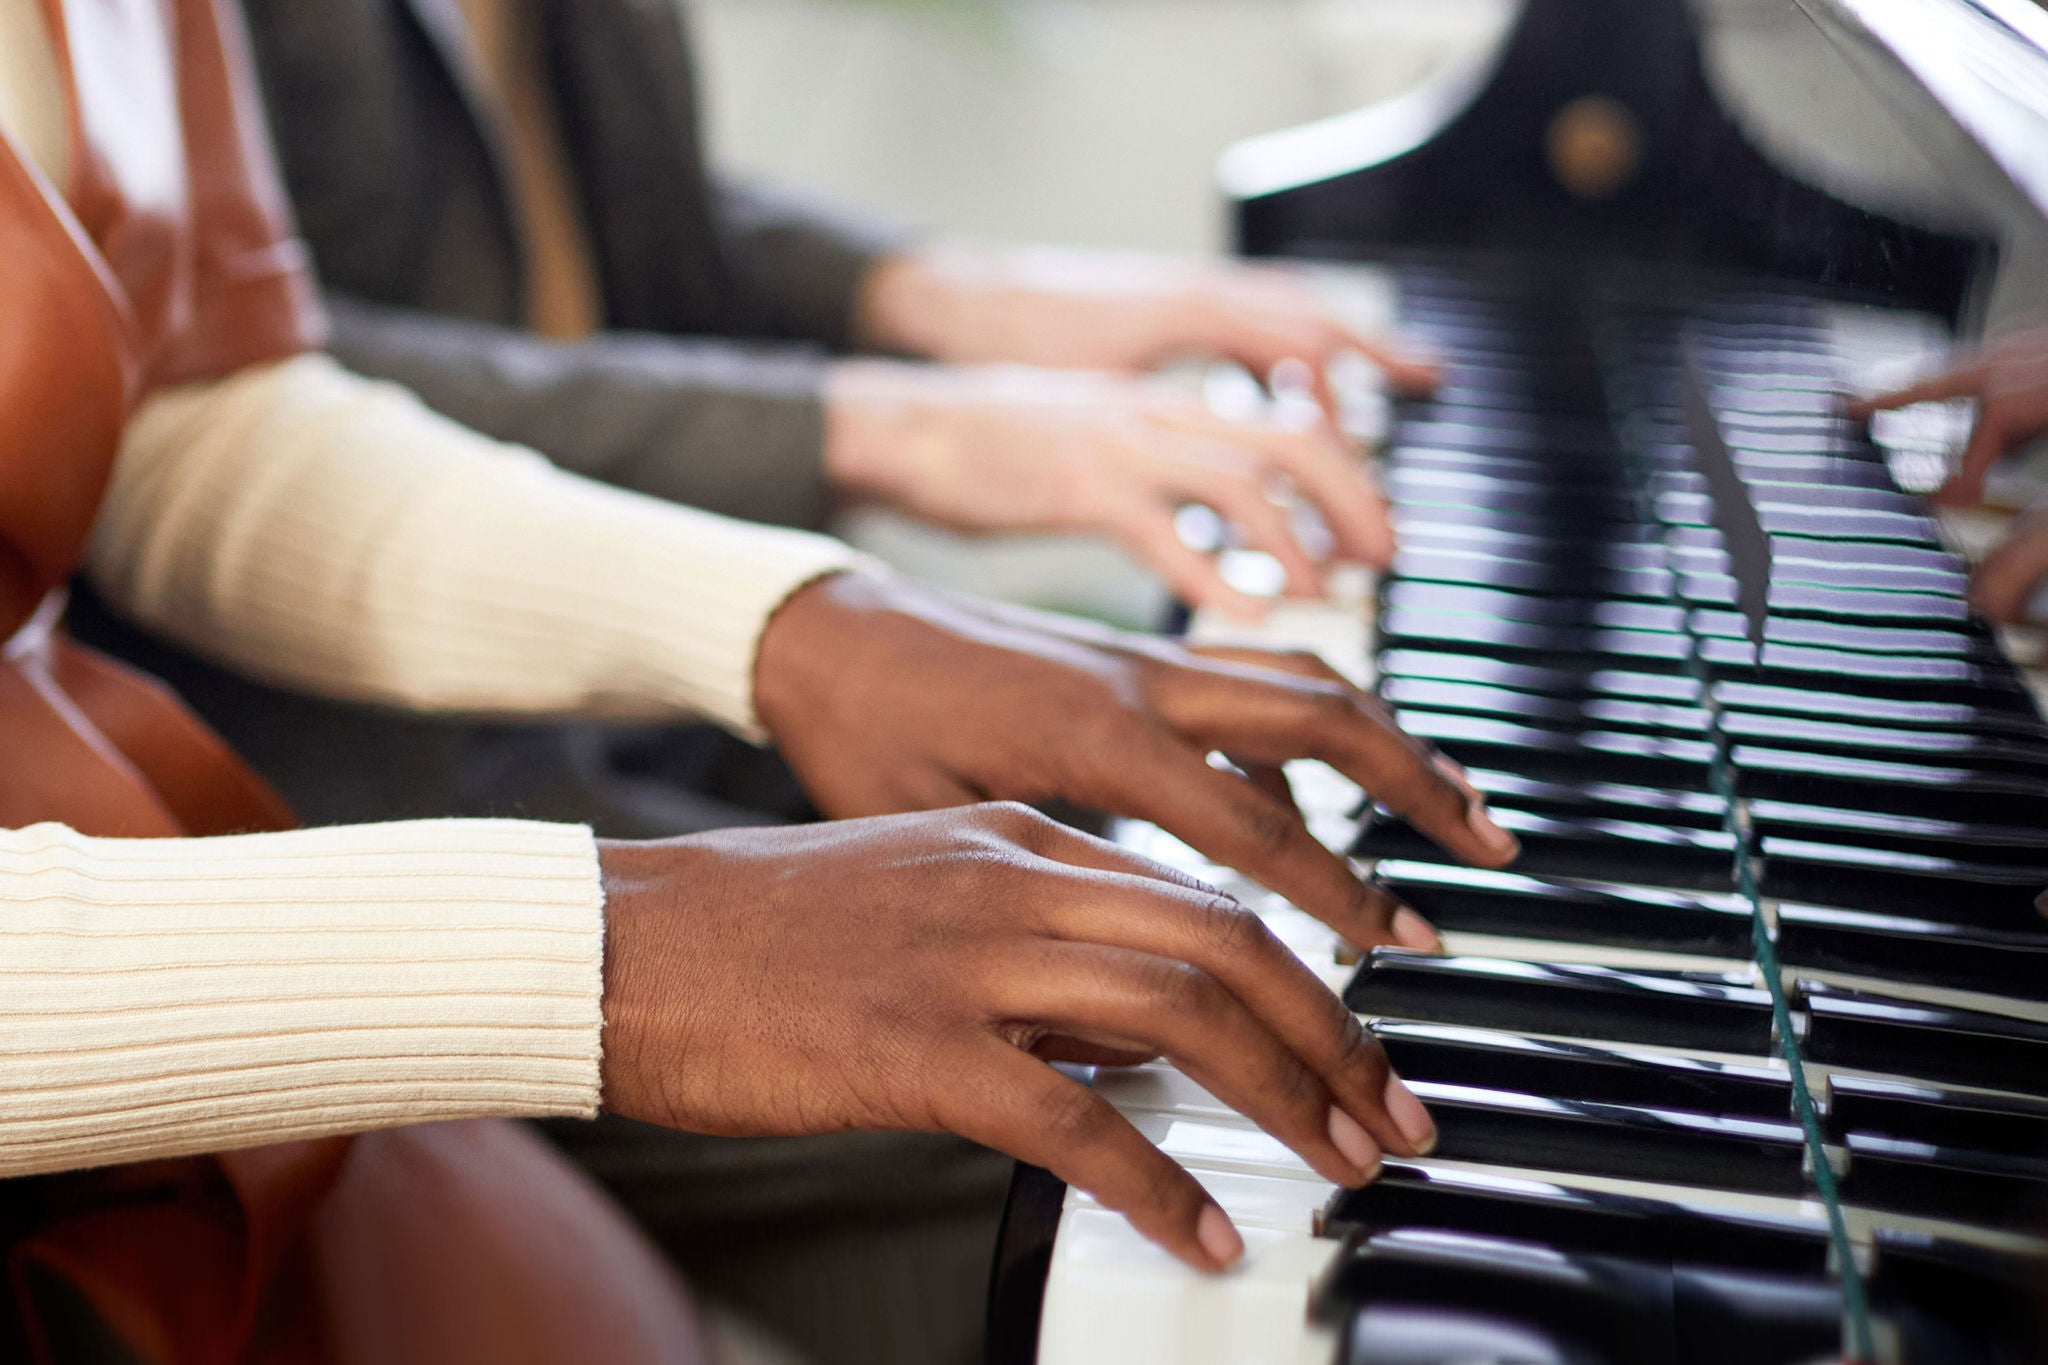 African young woman playing the piano together with her partner in team play during repetition at lesson